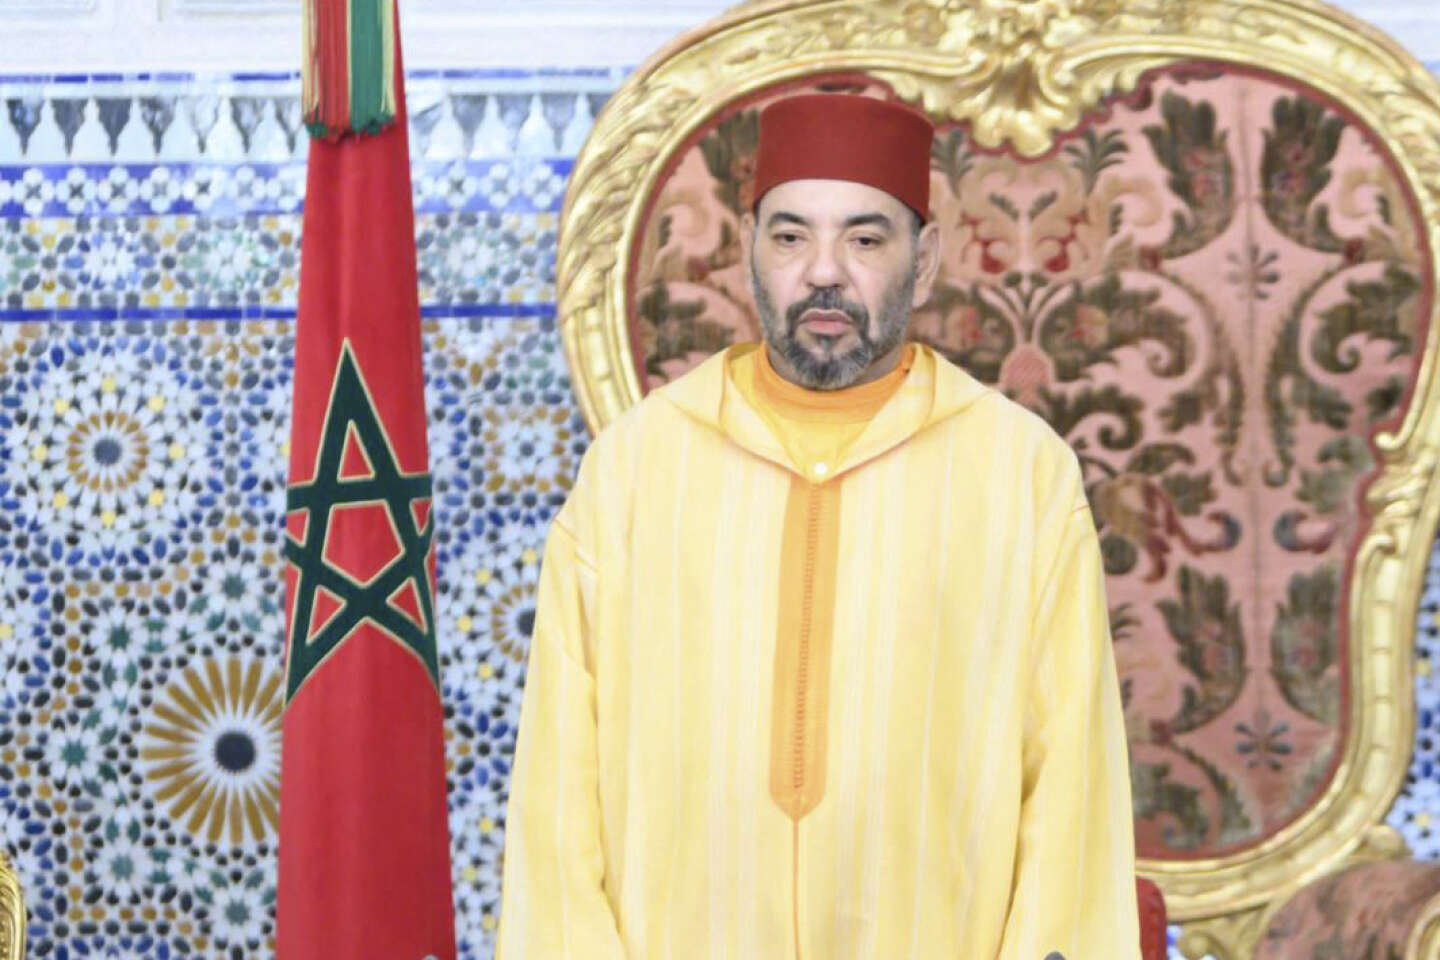 The King of Morocco is once again reaching out to Algeria